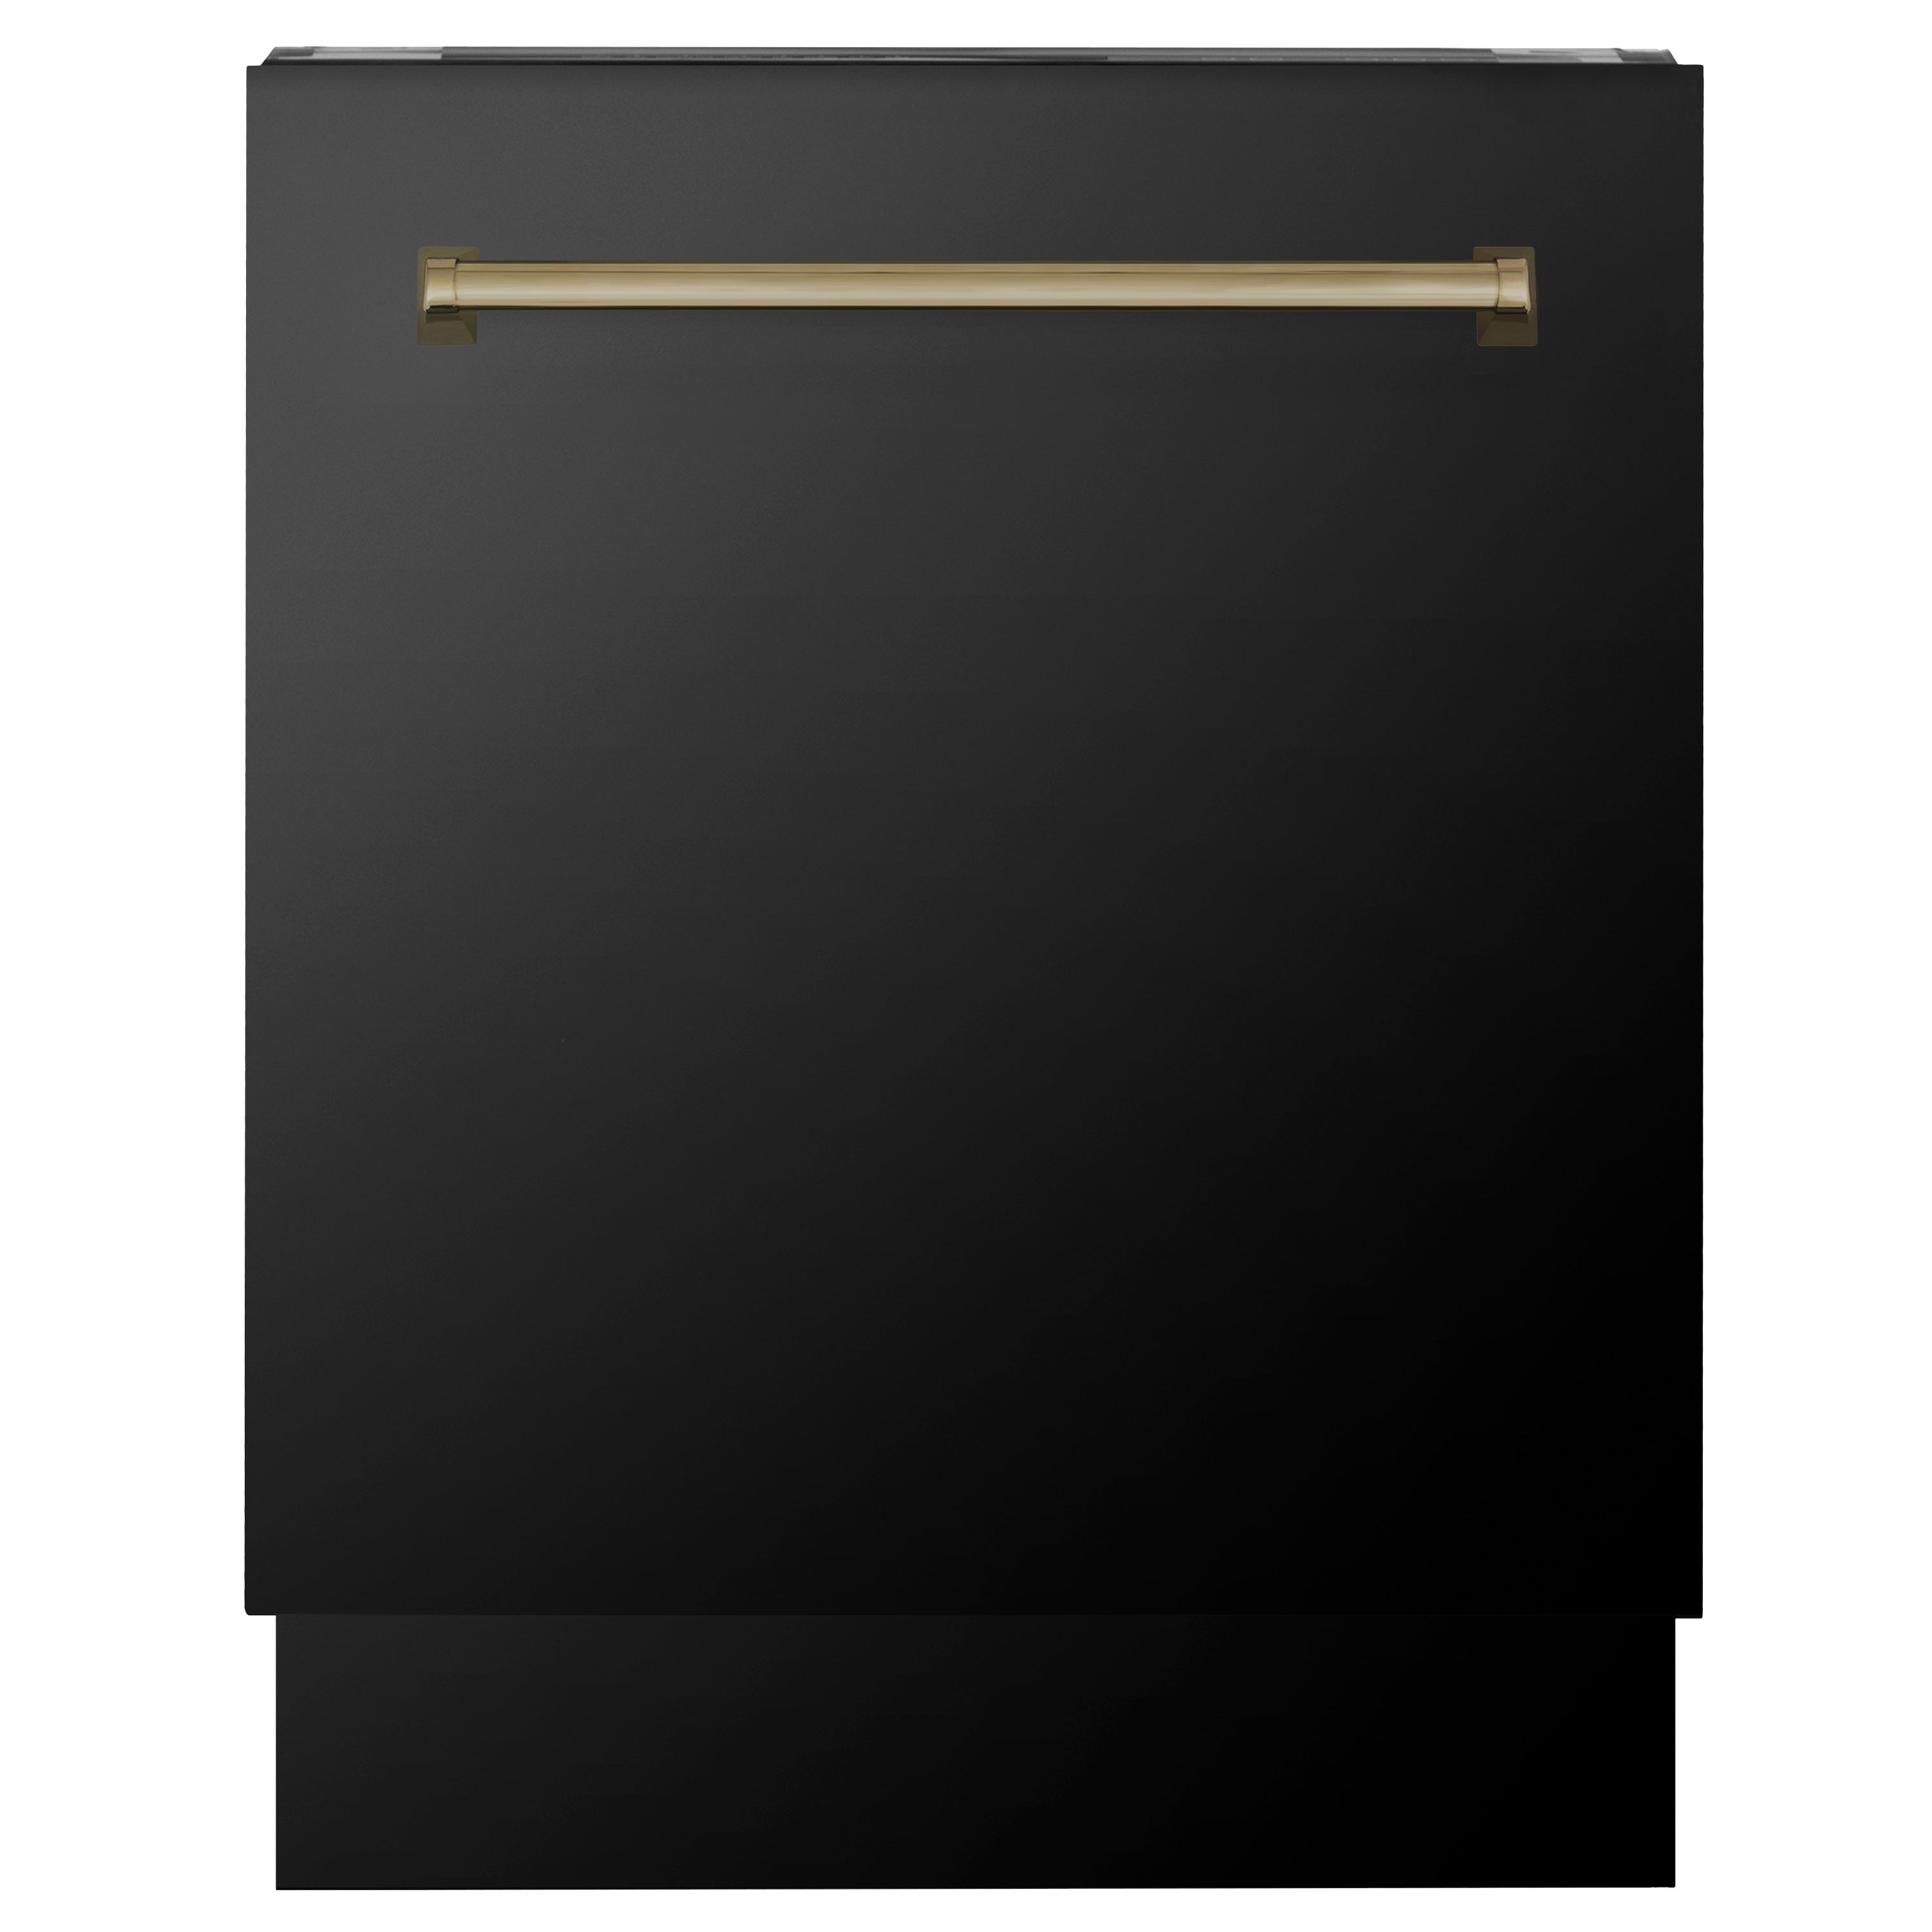 ZLINE Autograph Edition 24" 3rd Rack Top Control Tall Tub Dishwasher in Black Stainless Steel with Champagne Bronze Handle, 51dBa (DWVZ-BS-24-CB)